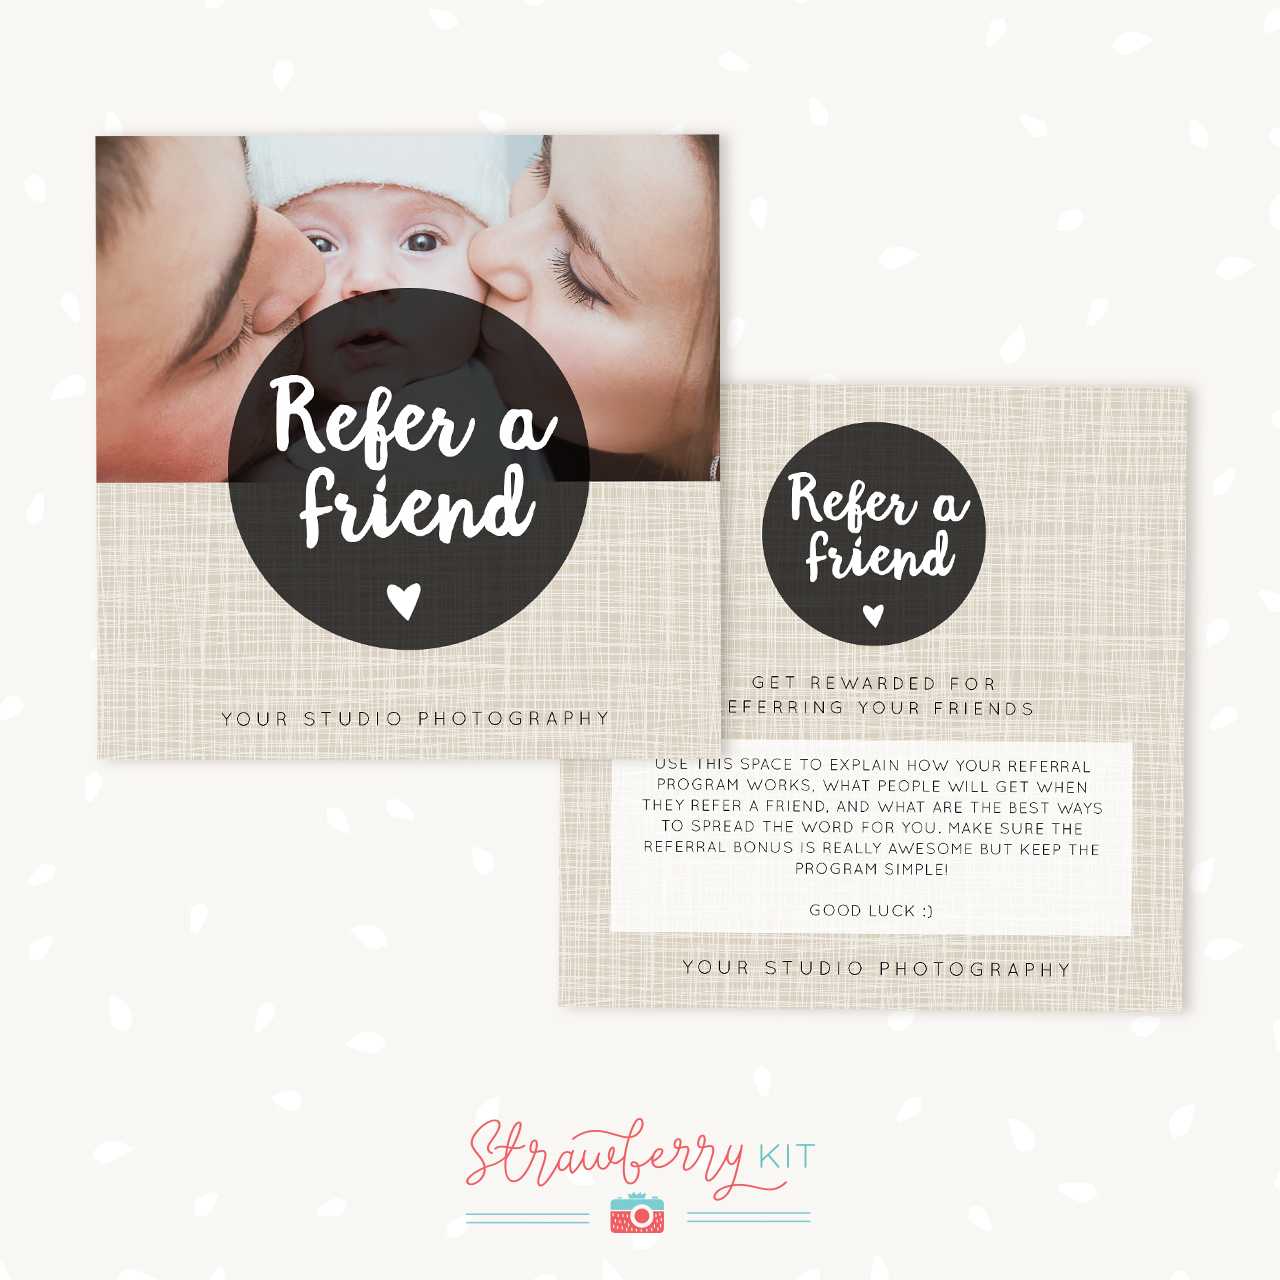 Referral Cards Photoshop Template – Strawberry Kit Within Photography Referral Card Templates